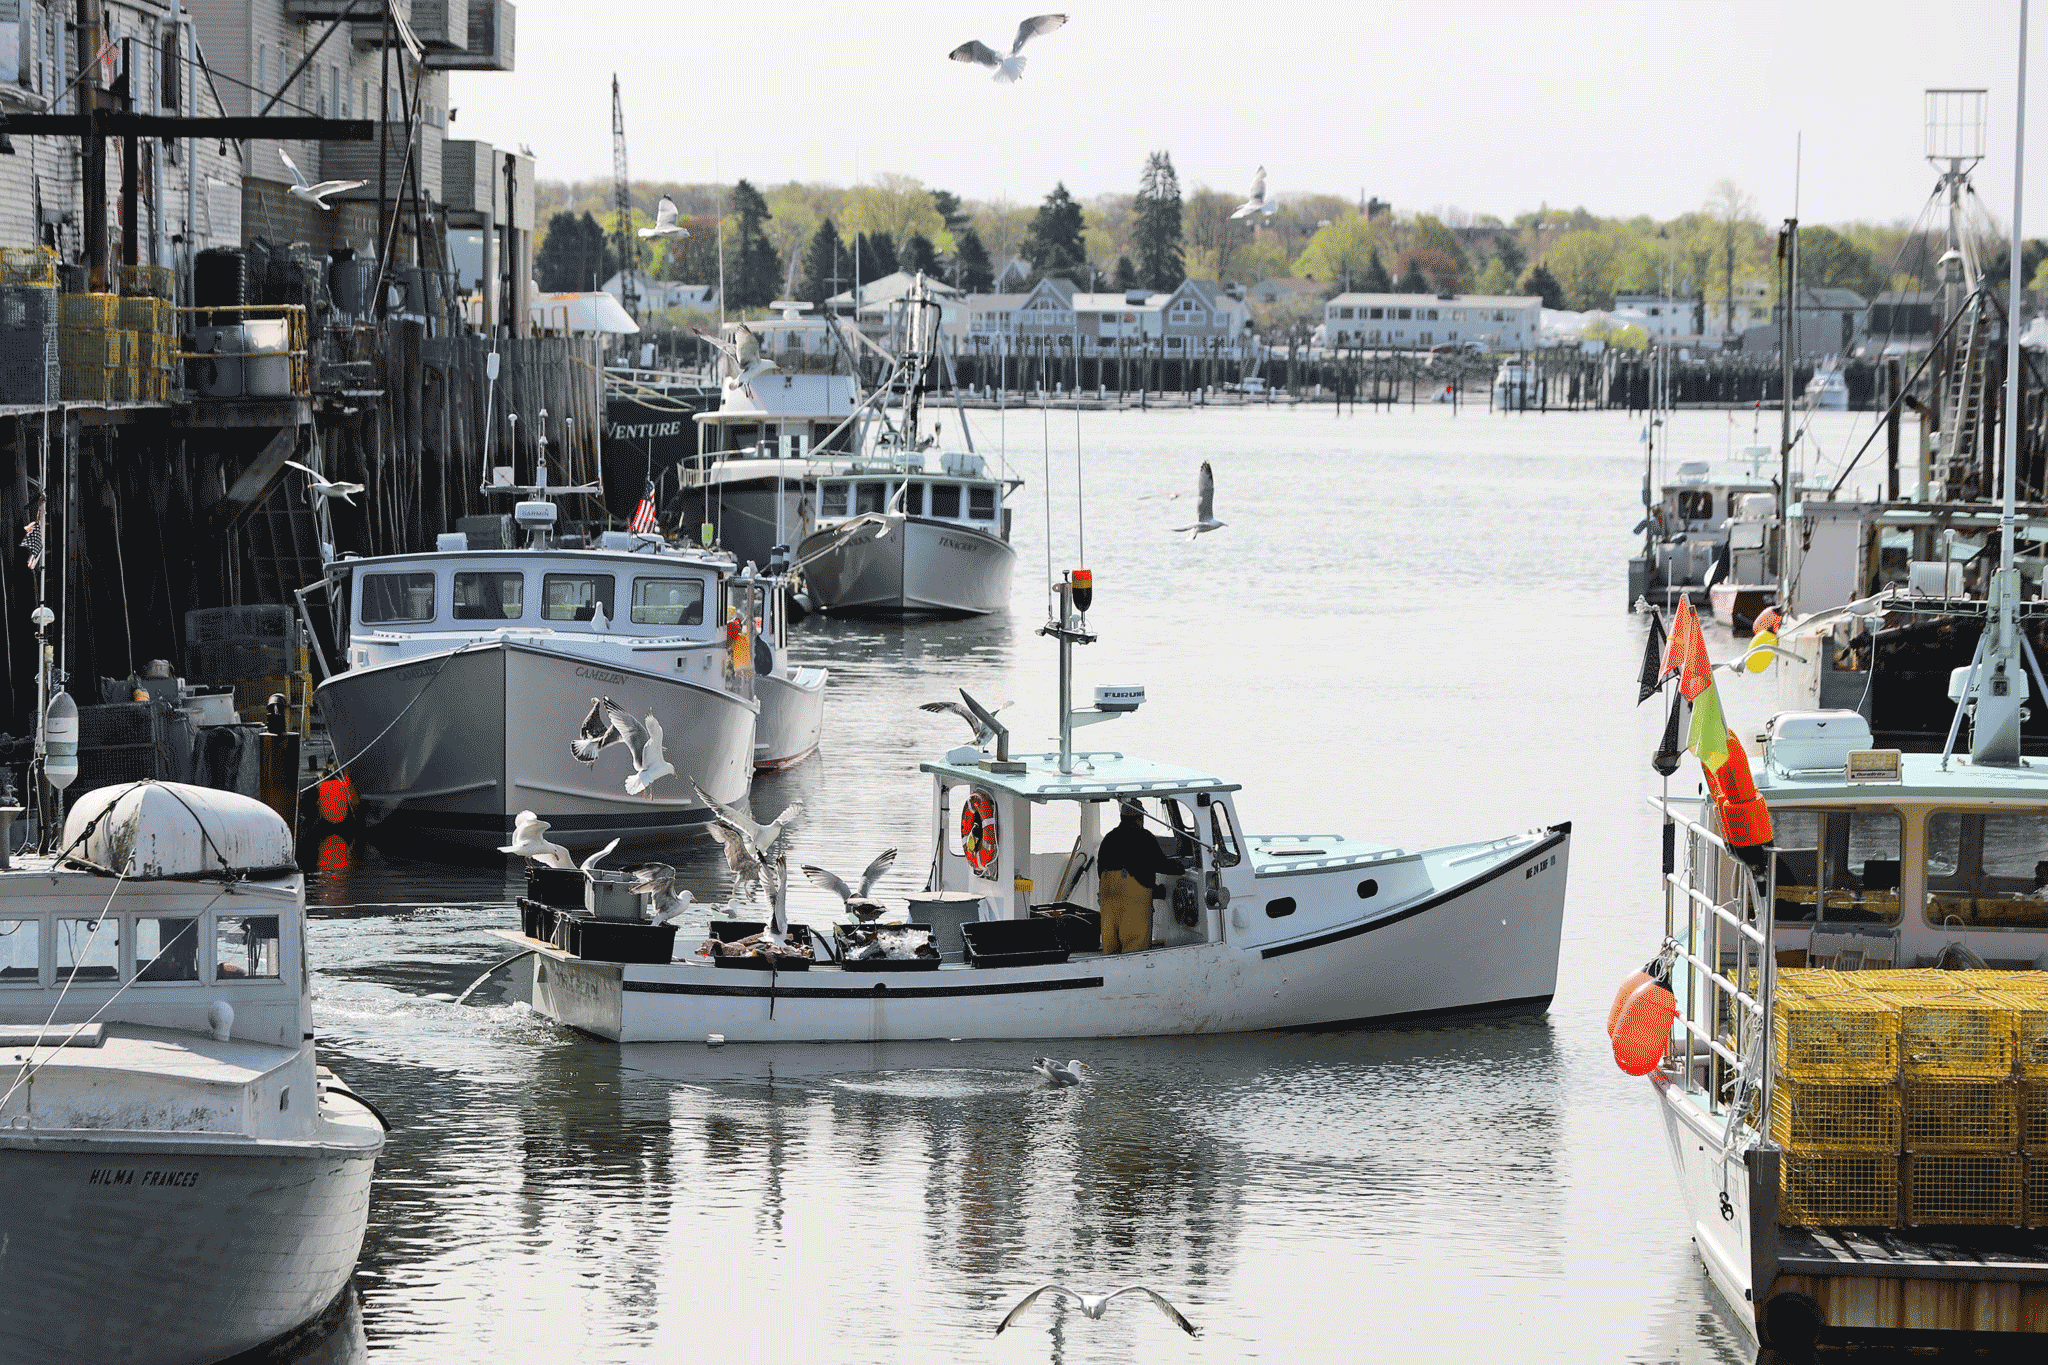 Gulls surround the lobster boat Cora Pearl as it departs a berth at Custom House Wharf in Portland.